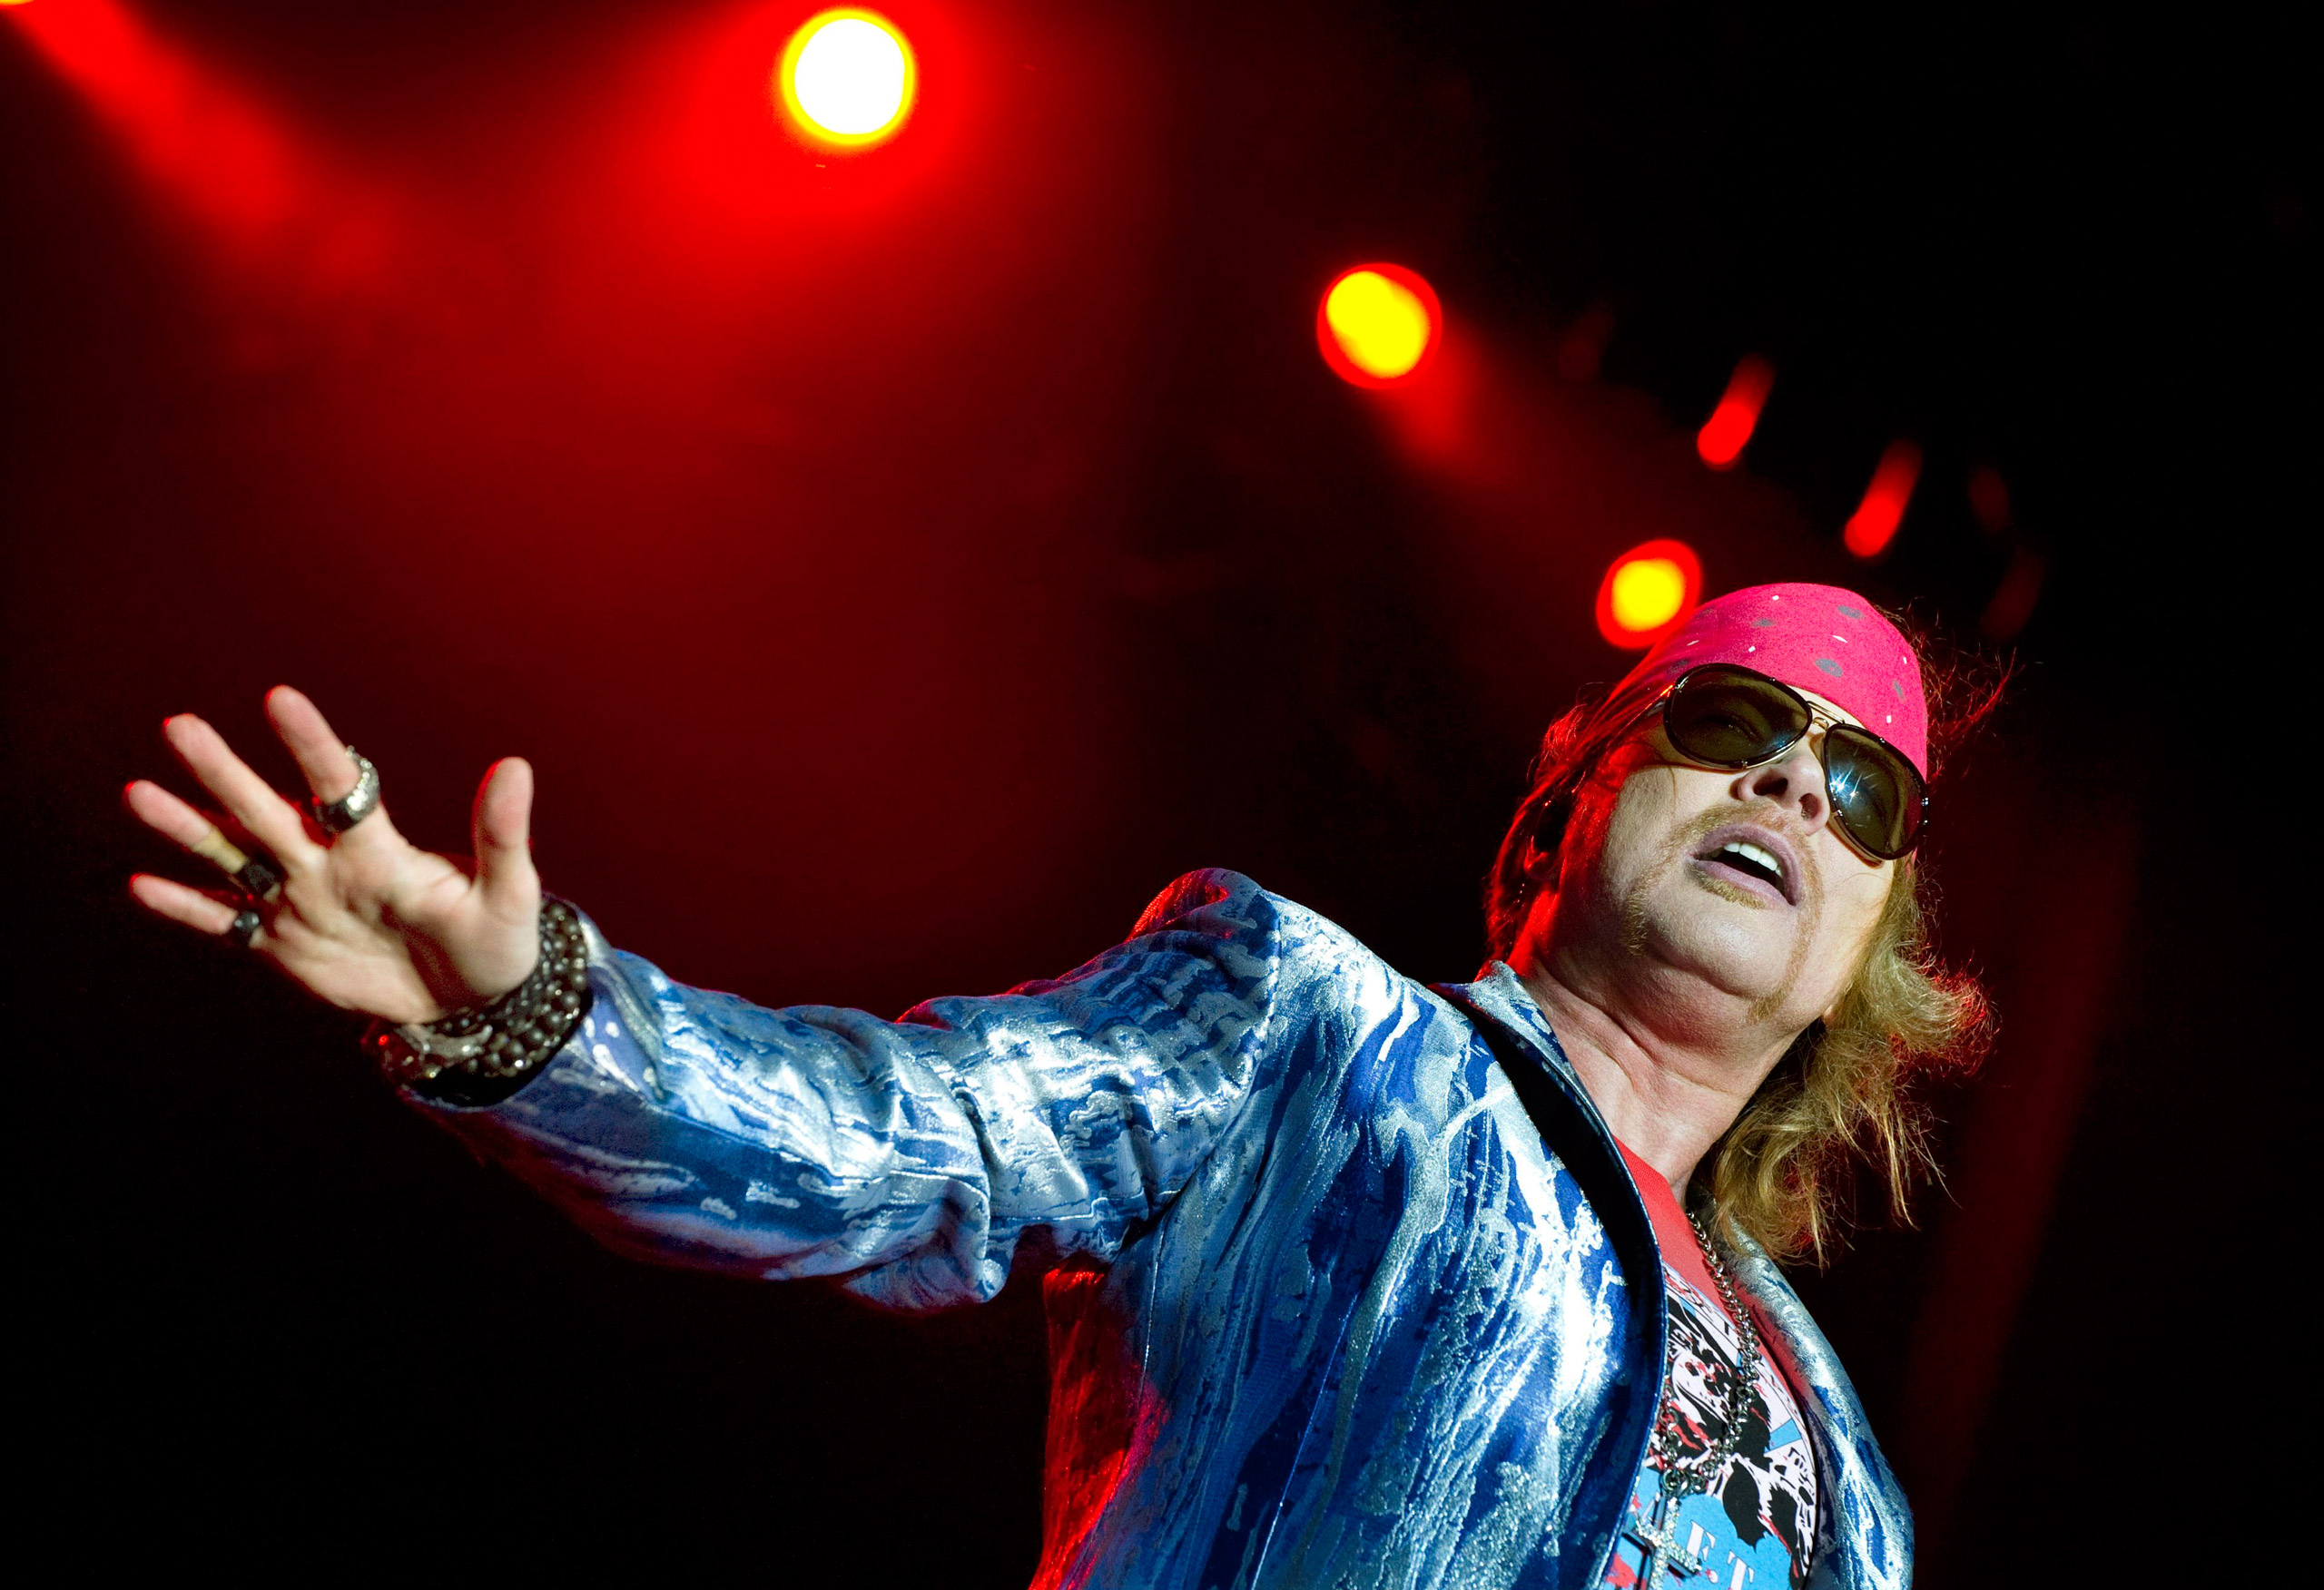 Axl Rose of Guns N' Roses performs during the Sweden Rock Festival in Solvesborg